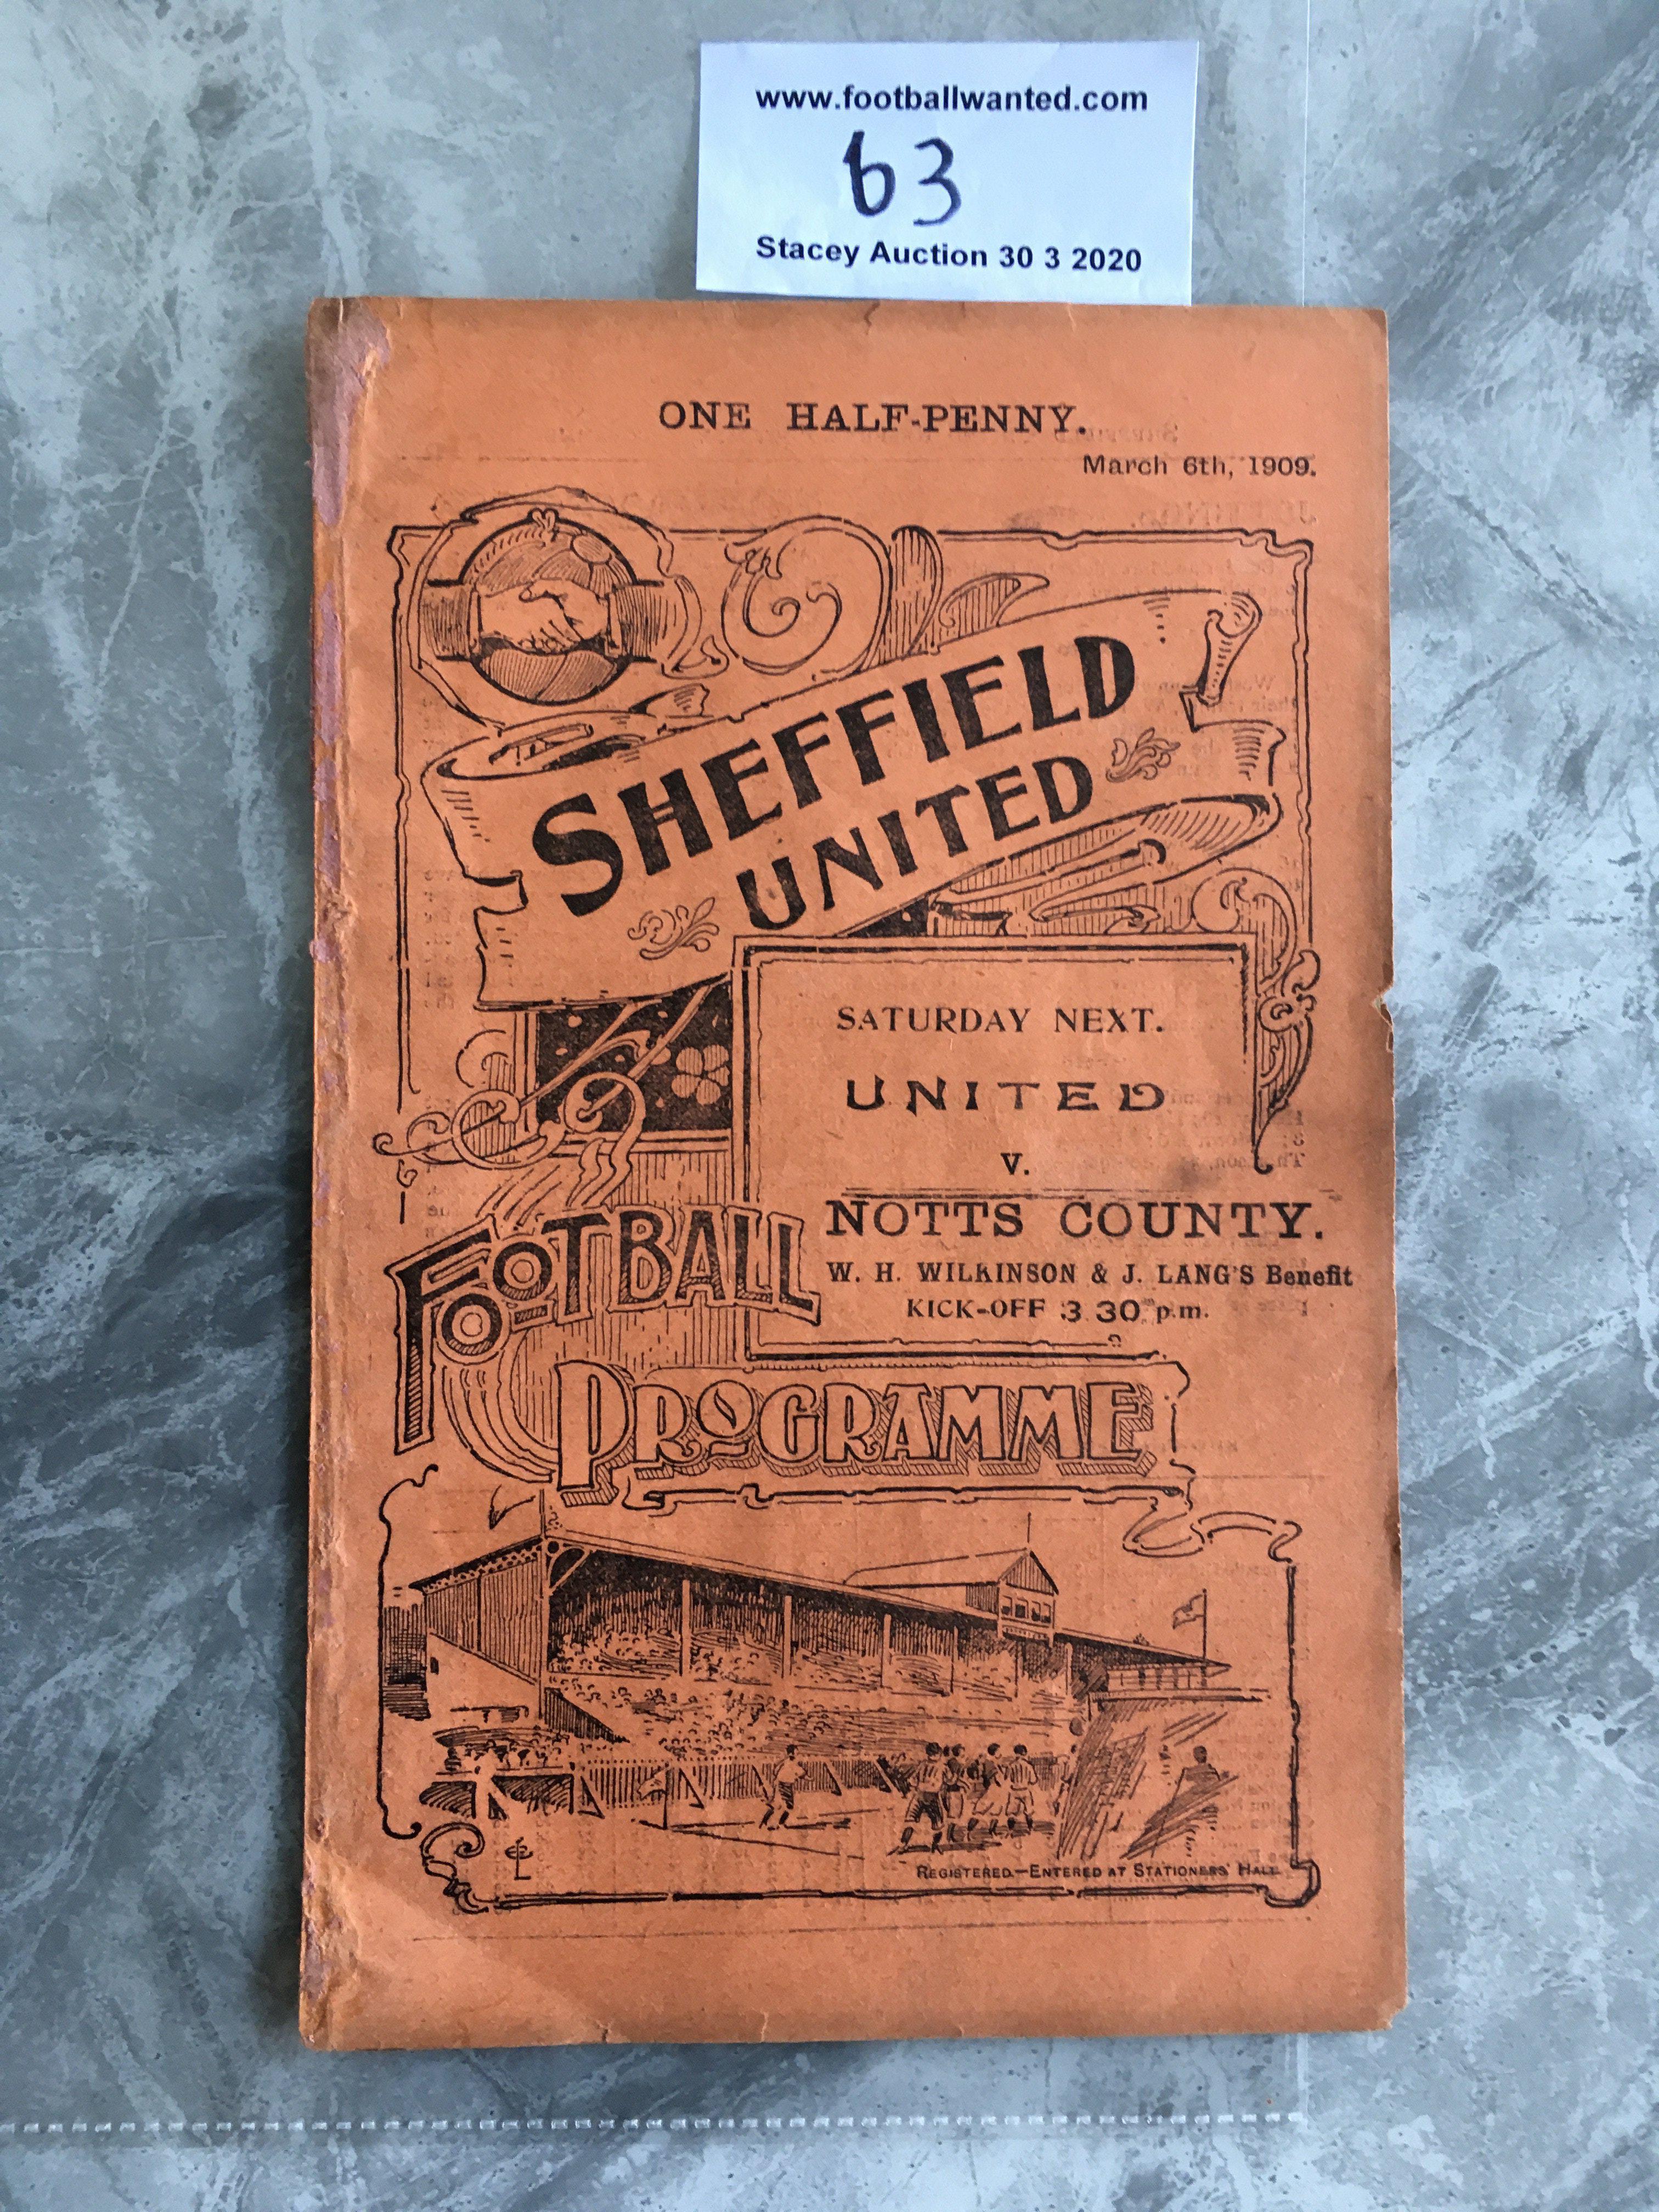 1908/09 Sheffield United Reserves v Mexborough Town Football Programme: 4 pager dated 6 3 1909. Ex